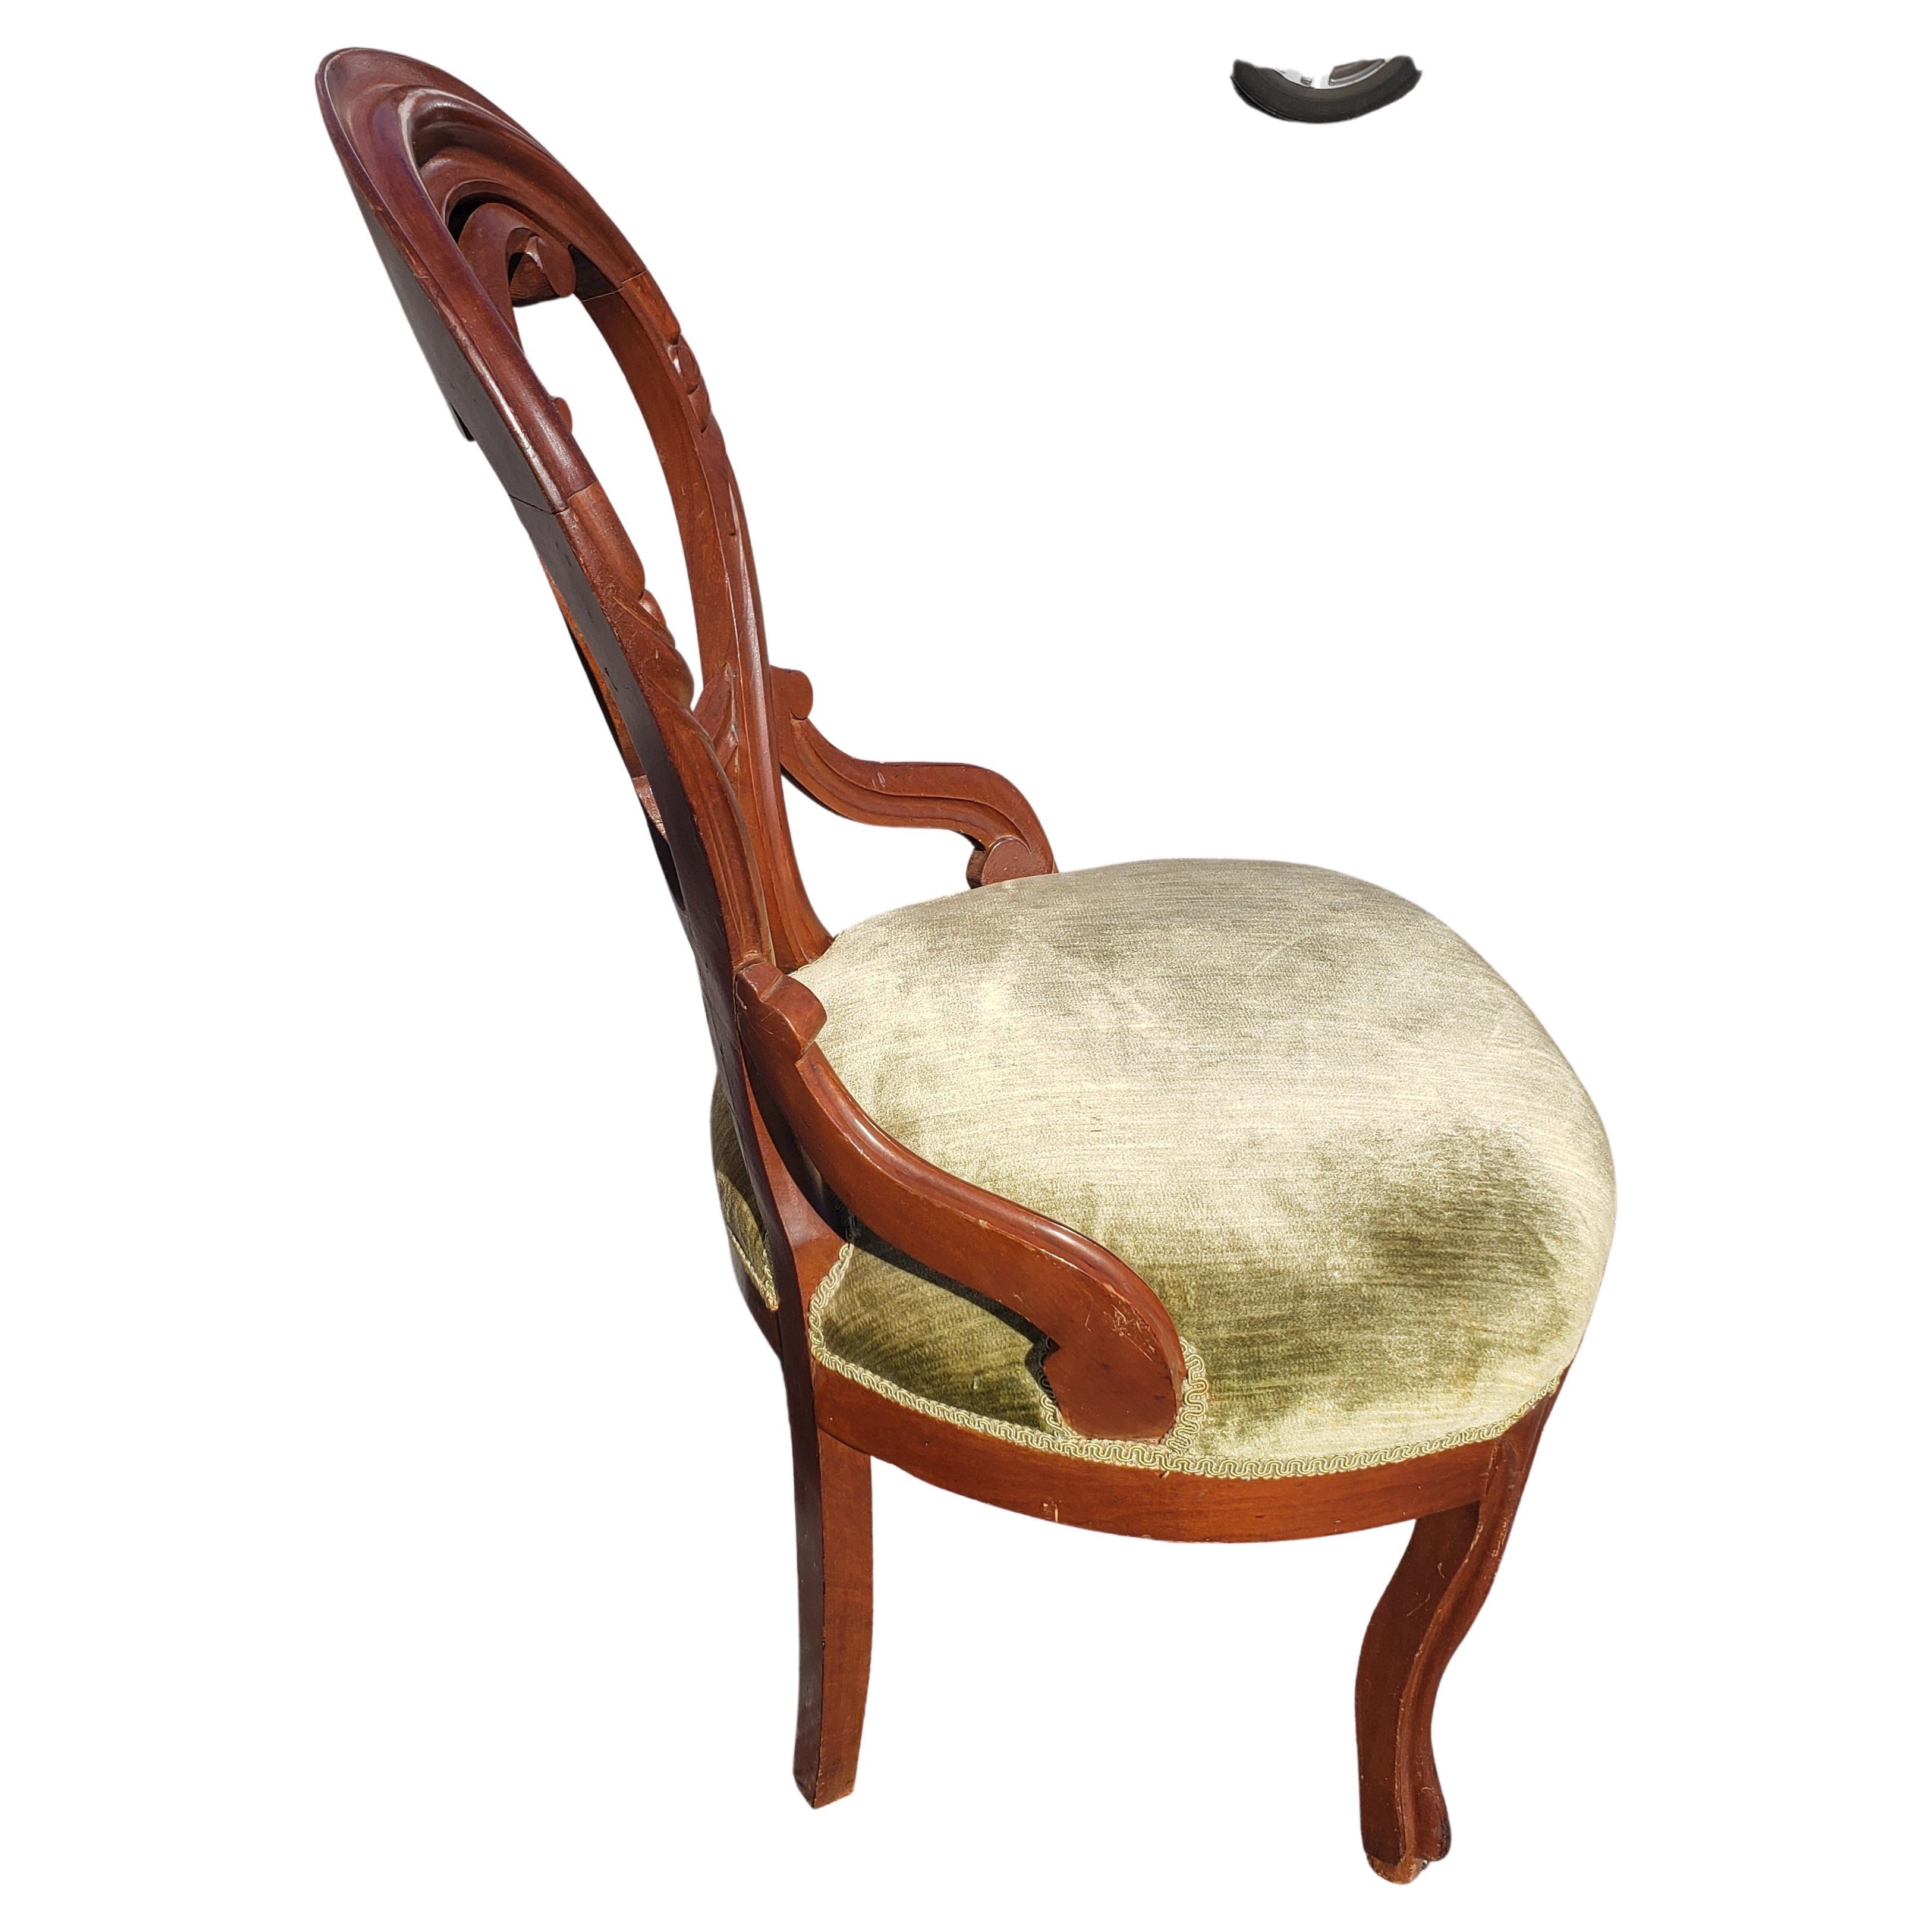 Hand-Crafted Victorian Antique Mahogany Carved Balloon Back Upholstered Seat Chair For Sale